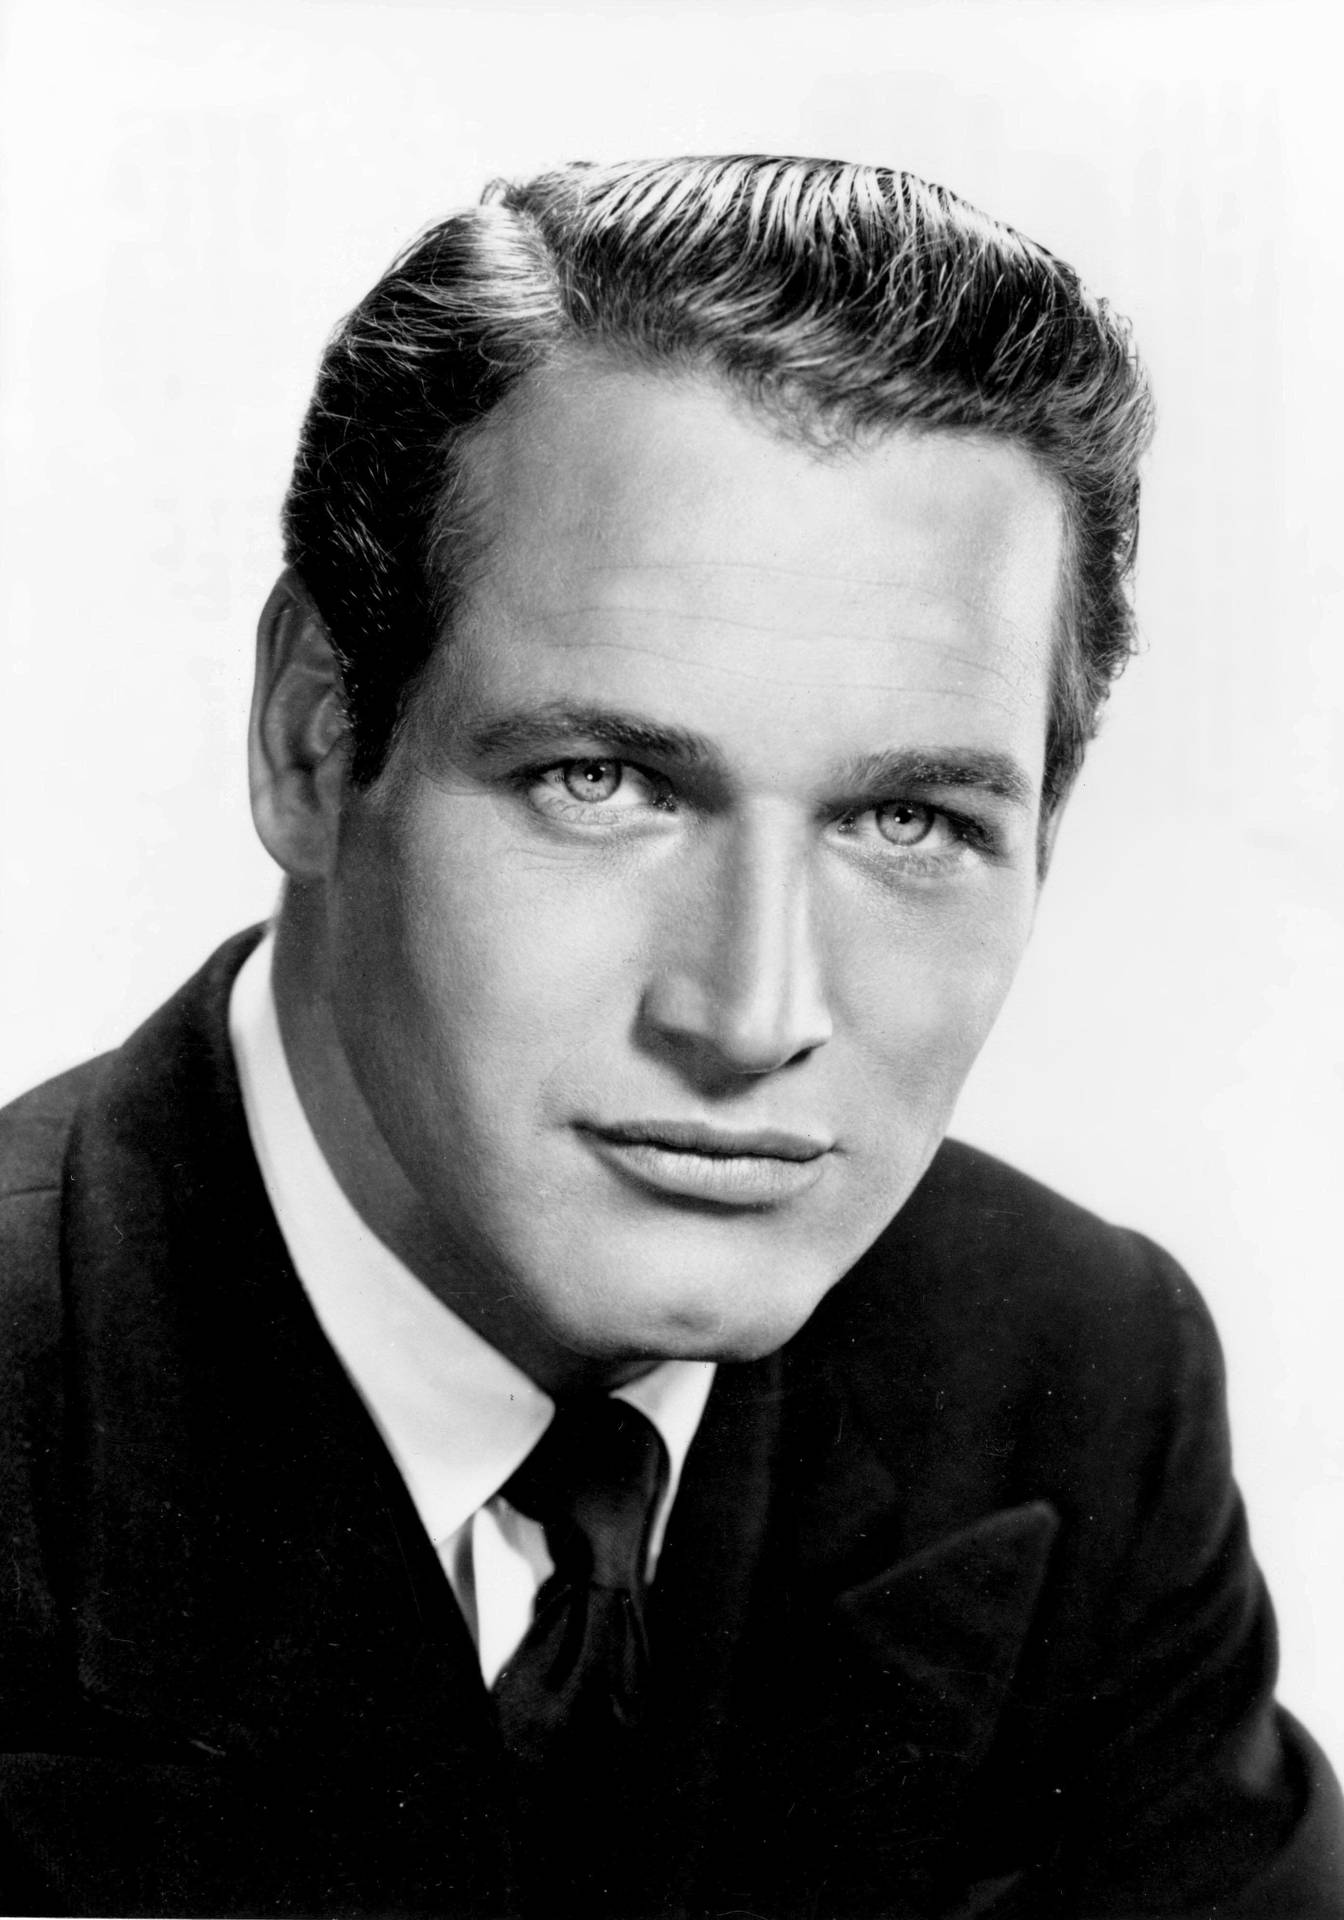 Paul Newman Revered Hairstyle Background